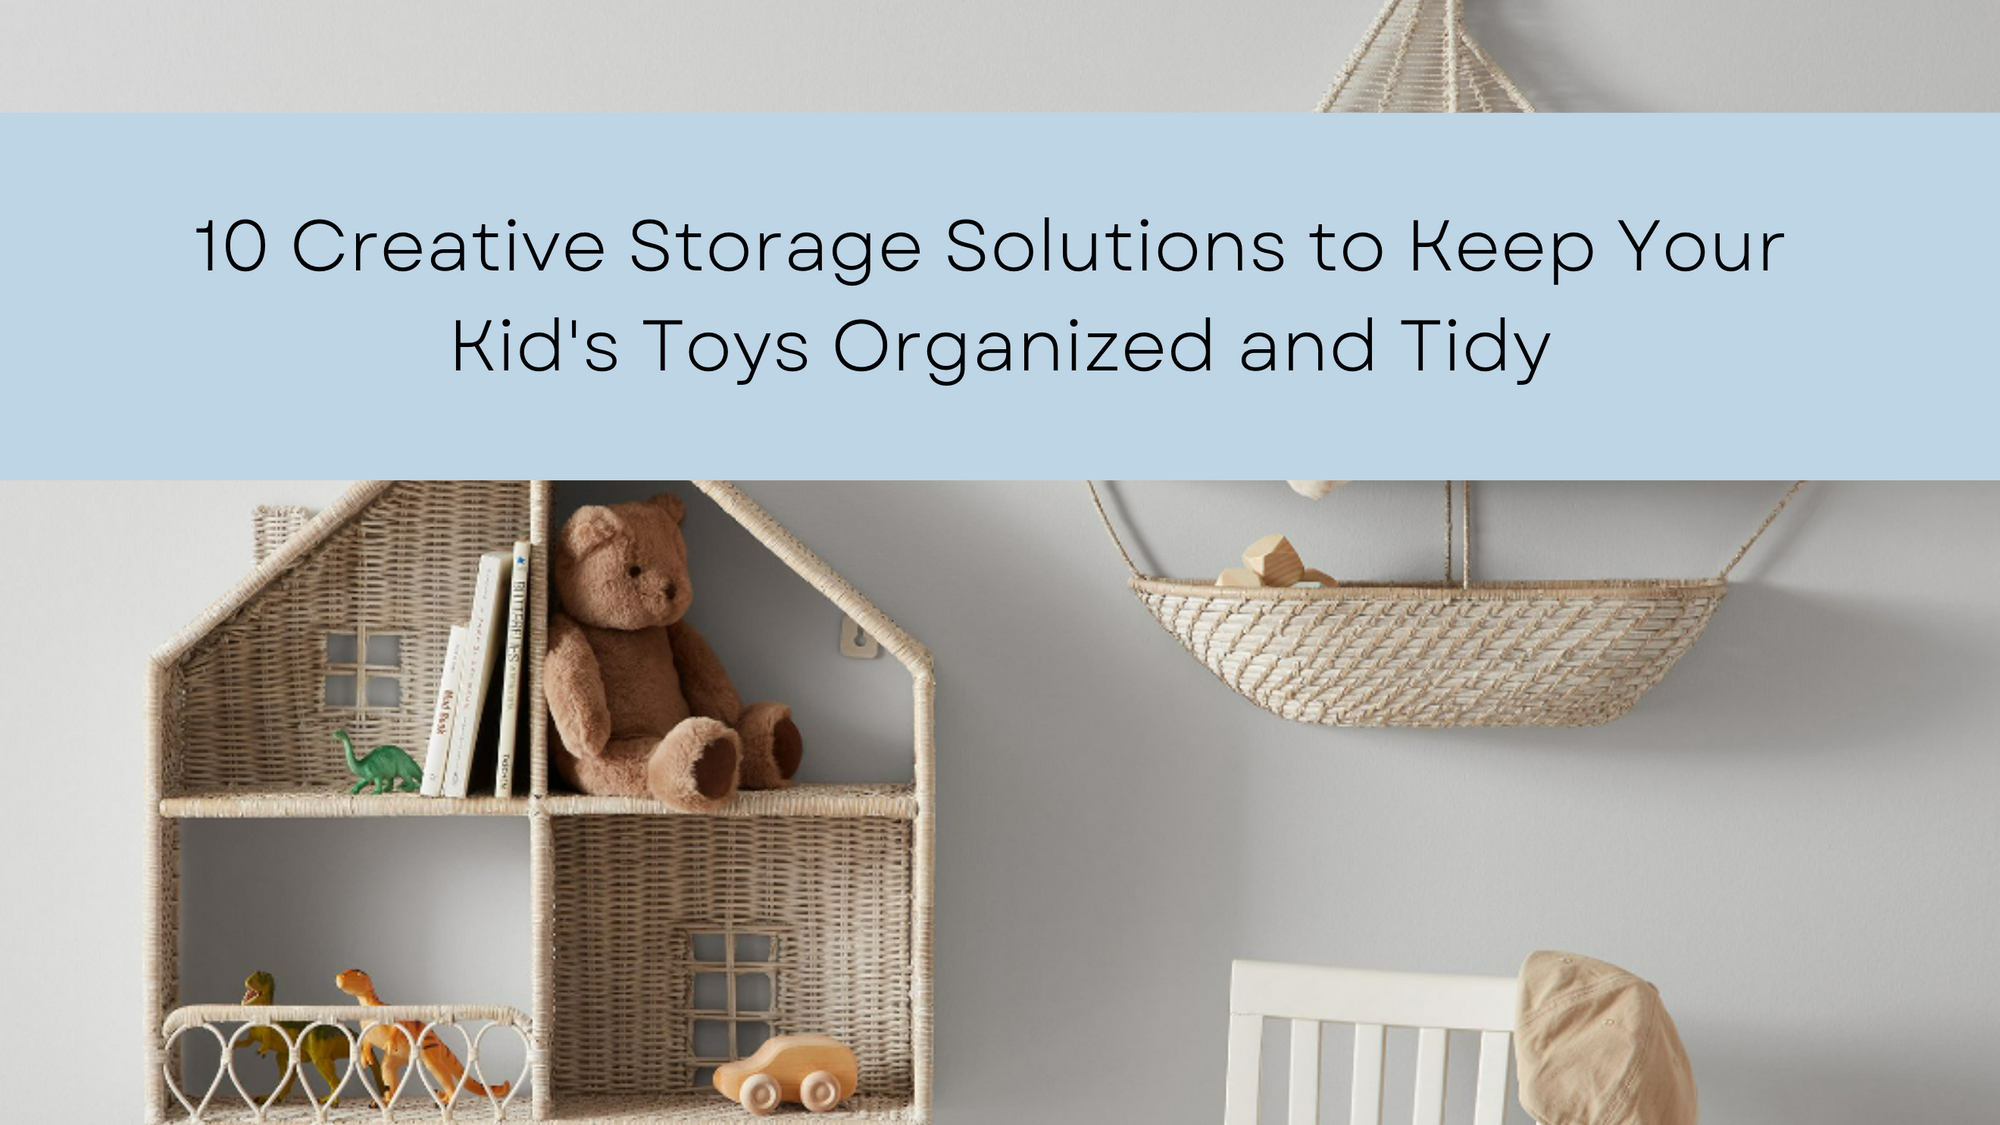 10 Creative Storage Solutions to Keep Your Kid's Toys Organized and Tidy